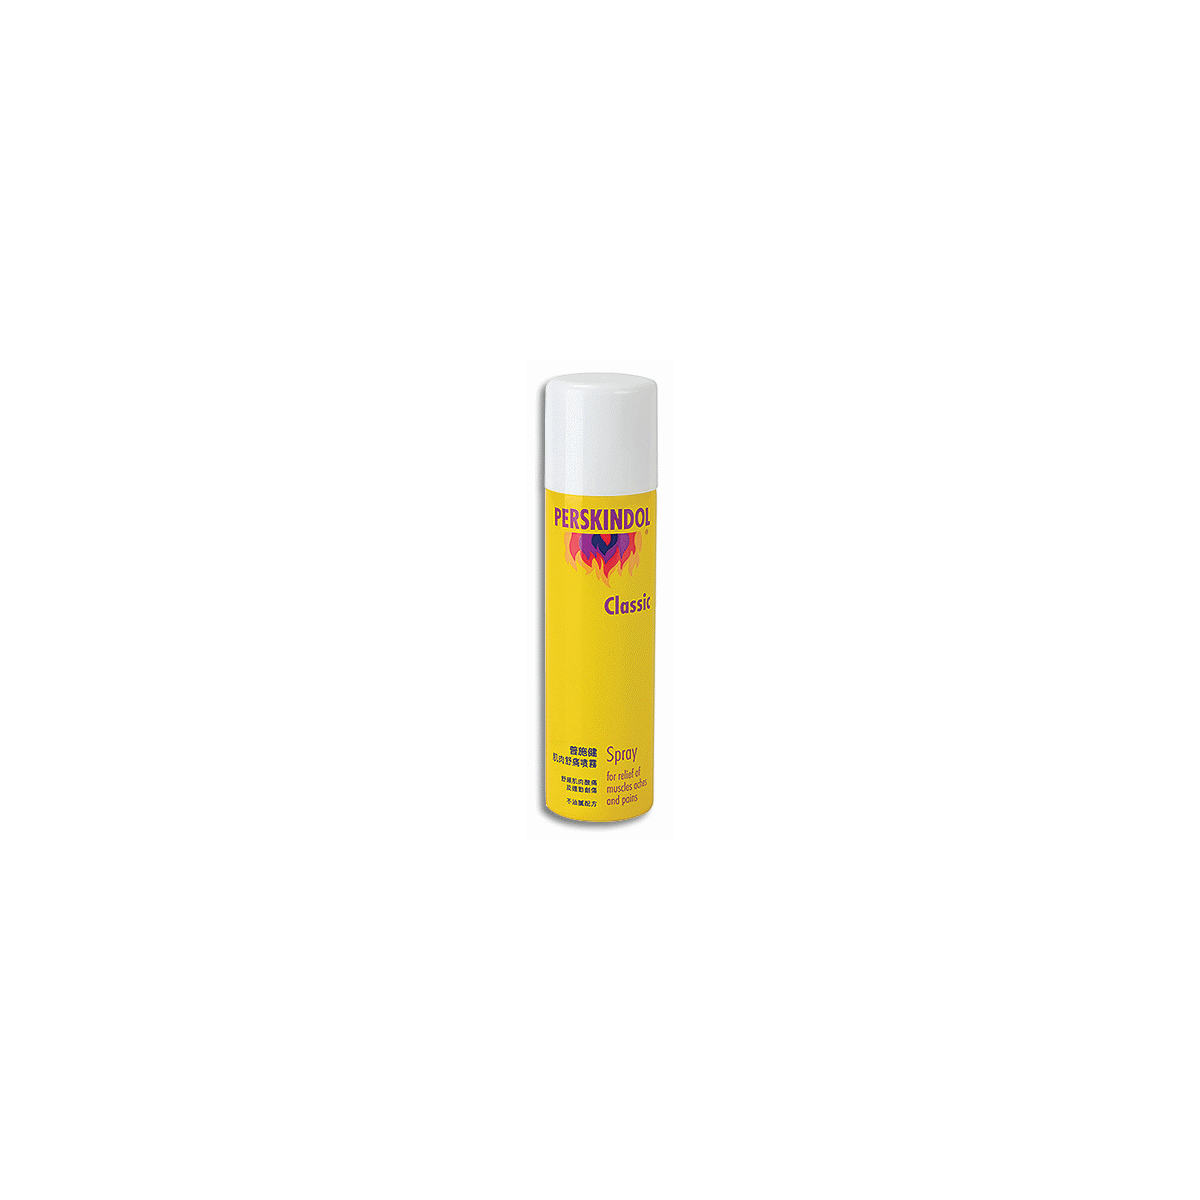 Perskindol Classic Spray | Action